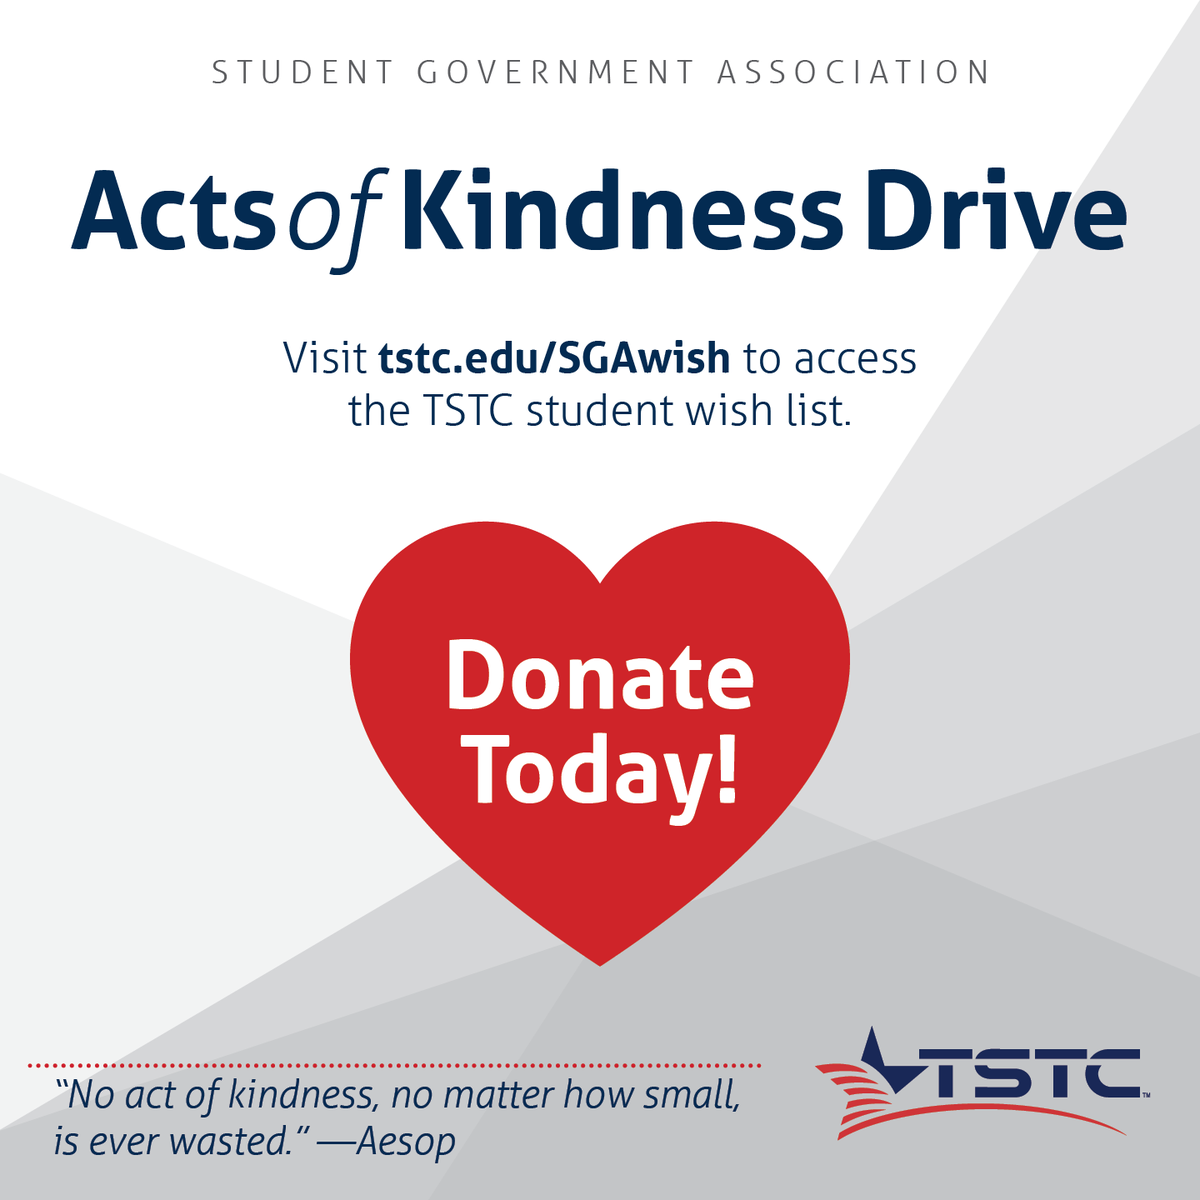 Help support TSTC students in need. Purchase an item from the statewide student wish list and have them shipped directly to the campus on your behalf. A little help goes a long way. Donate today! tstc.edu/SGAwish